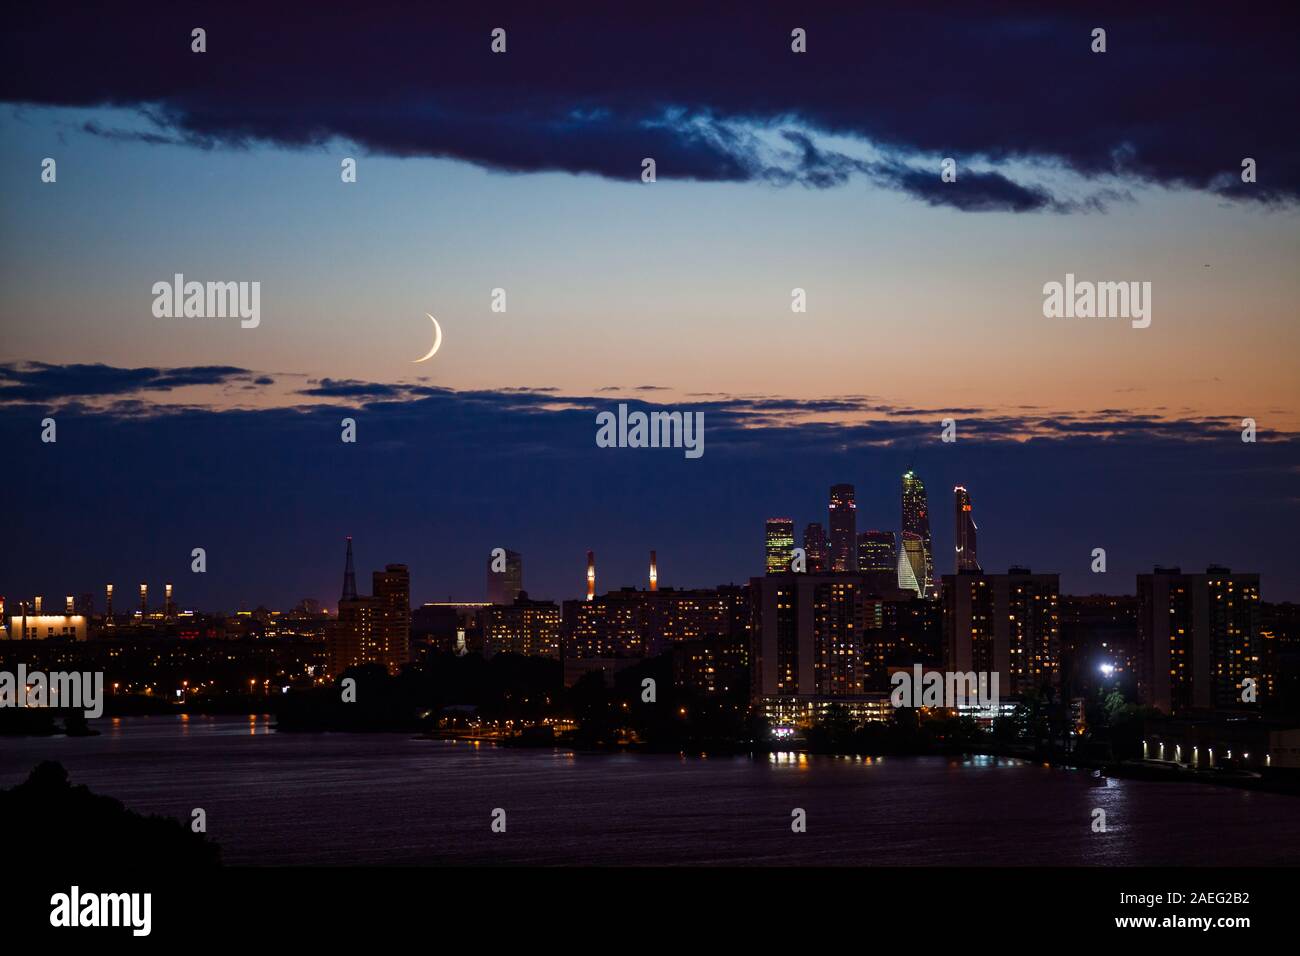 Night or evening city scape with skyscrapers and town silhouette on river in deep blue and yellow sky with clouds and crescent. Stock Photo